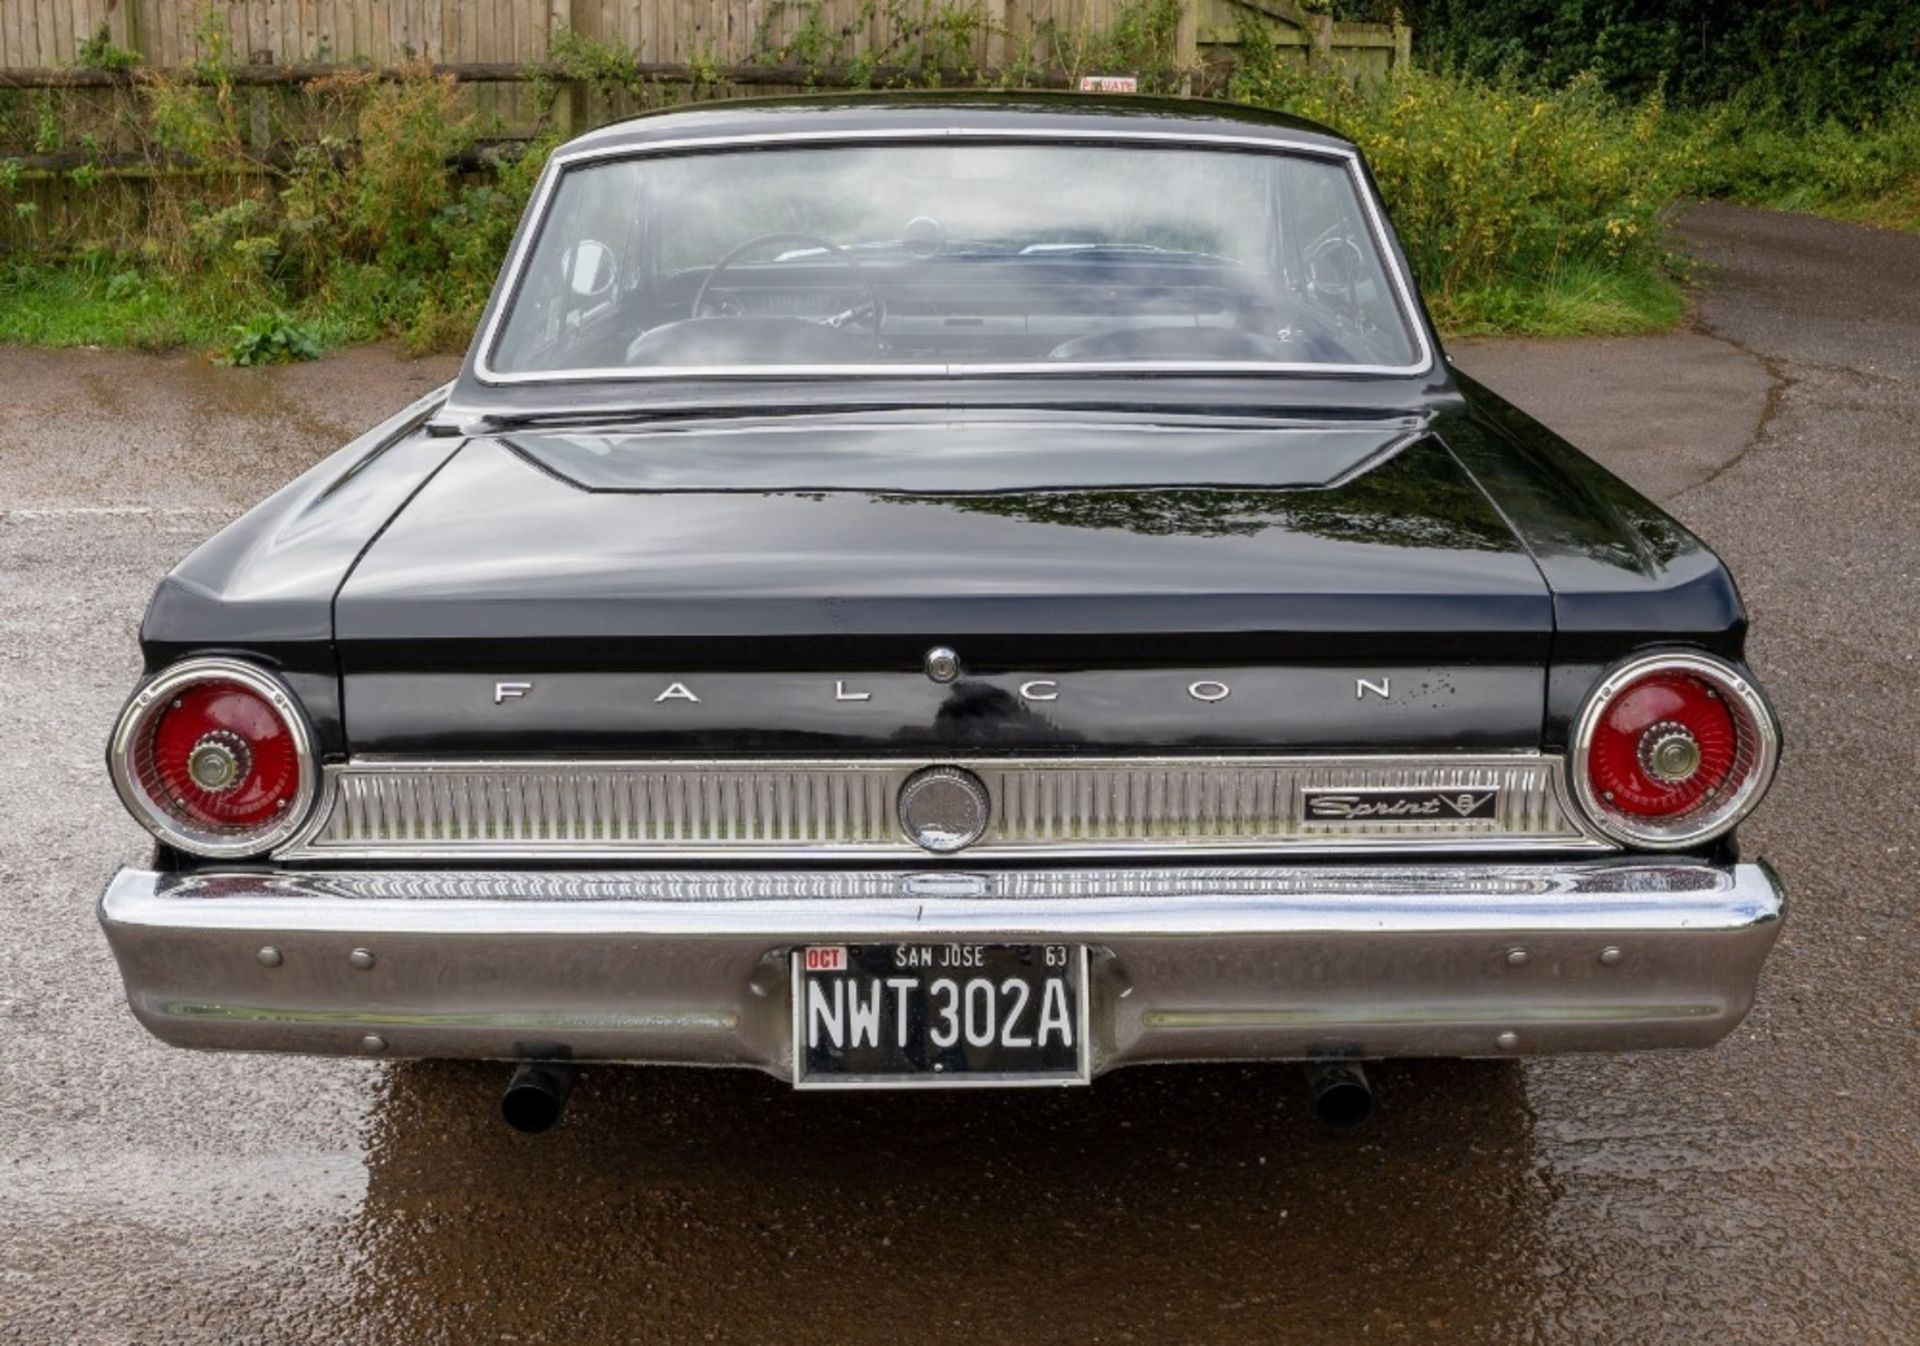 1964 FORD FALCON SPRINT Registration Number: NWT 302A Chassis Number: TBA Recorded Mileage: 41,500 - Image 5 of 16